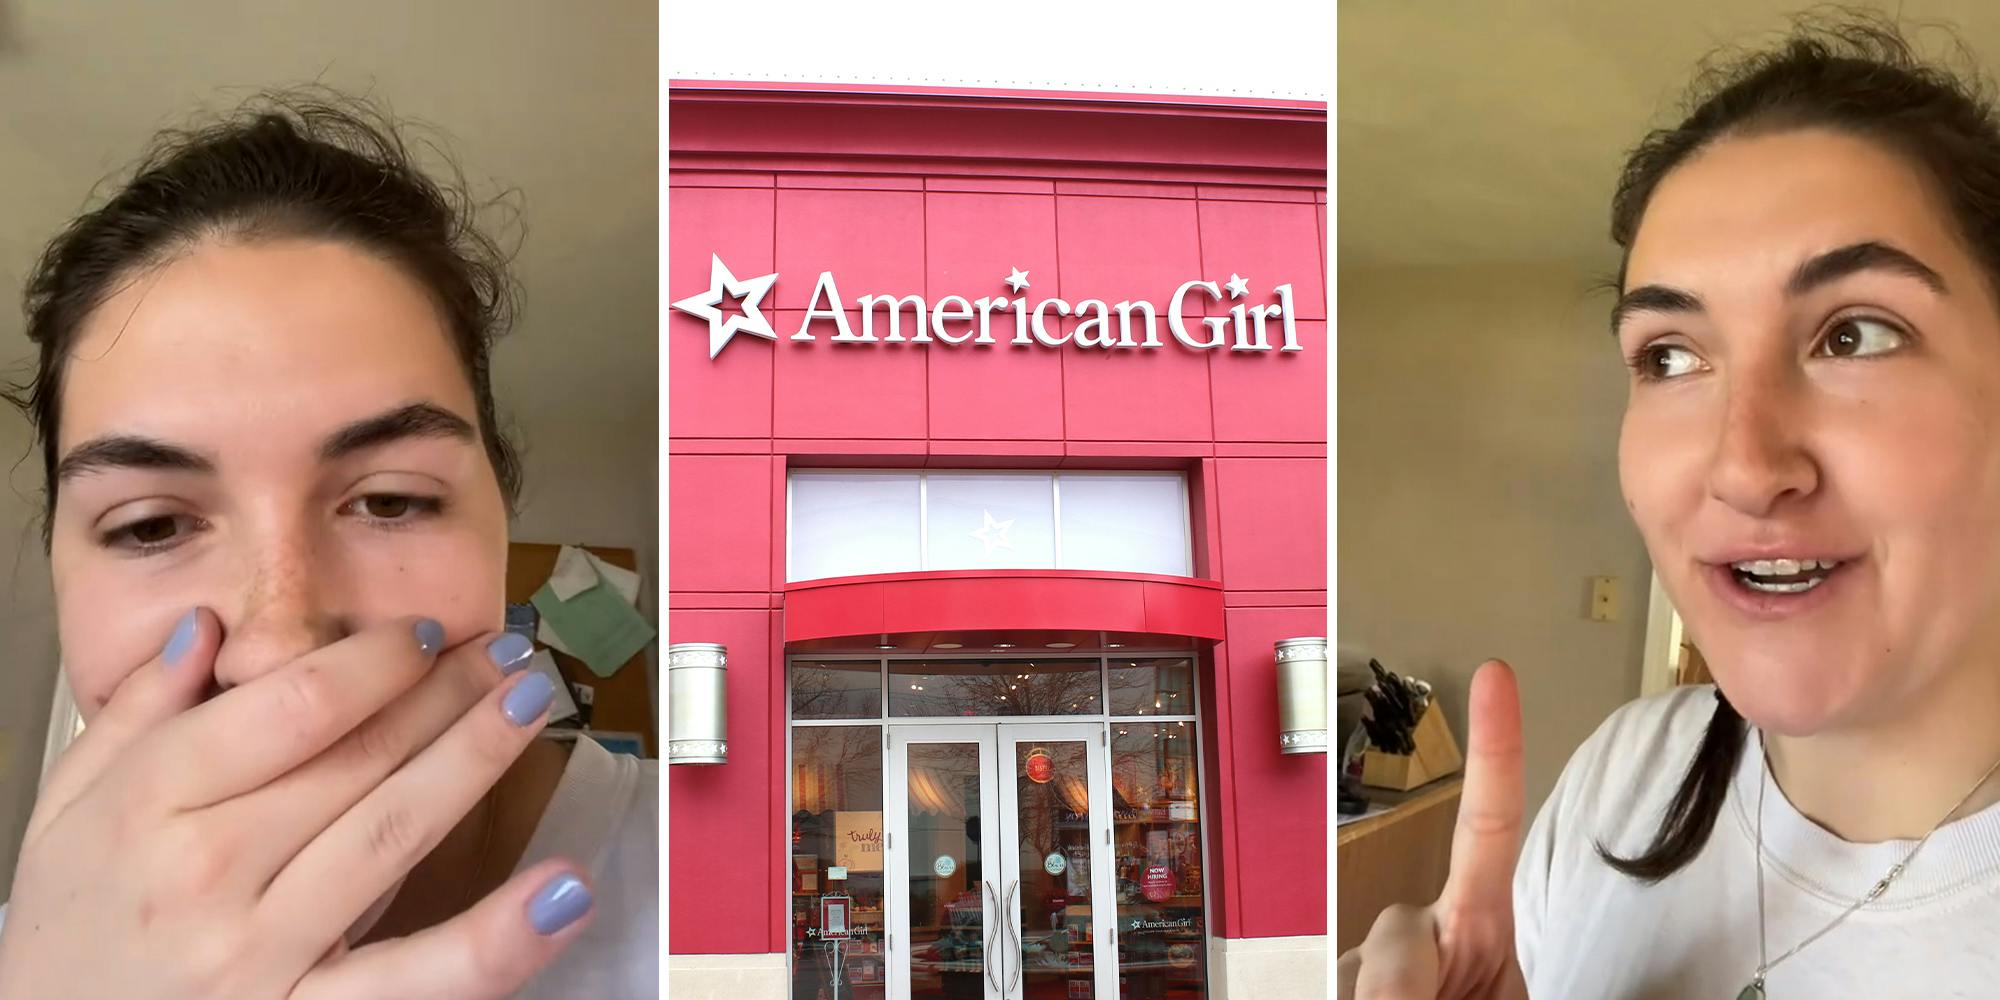 ‘How does this even happen?’: Woman issues warning on American Girl dolls after getting hers from storage